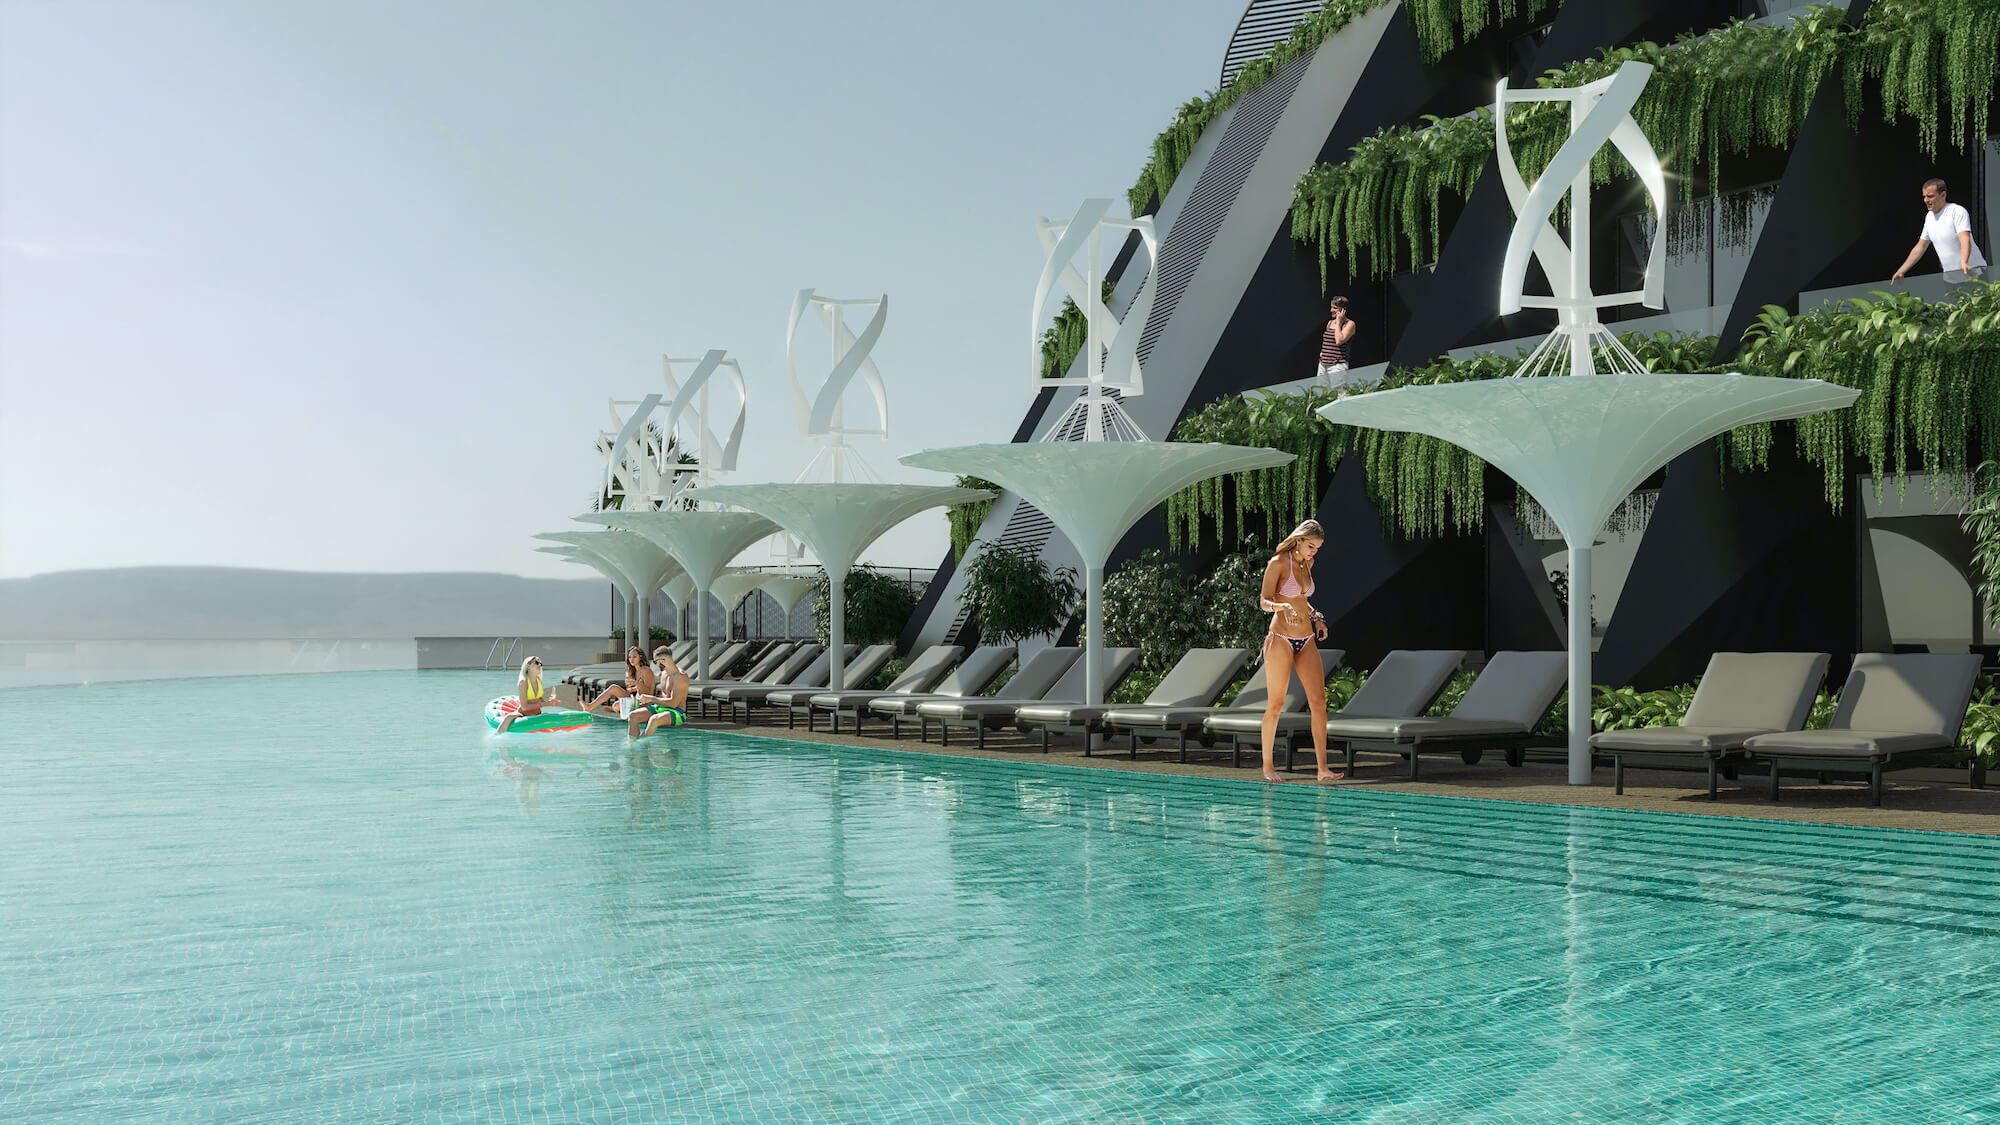 This floating, rotating hotel in Qatar will generate its own electricity!